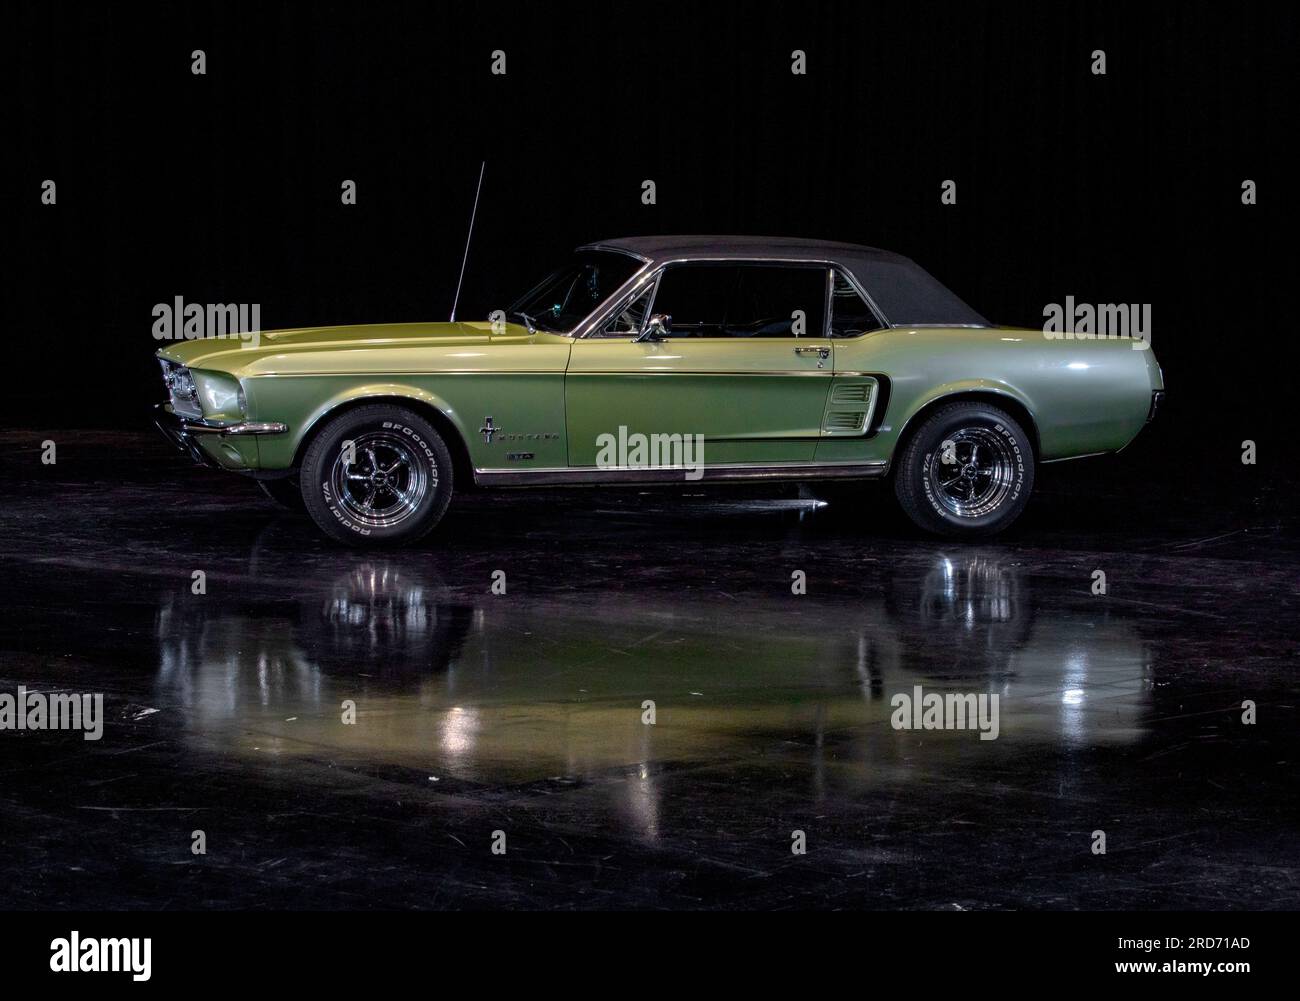 1967 1st generation Ford Mustang GT  classic American muscle car Stock Photo